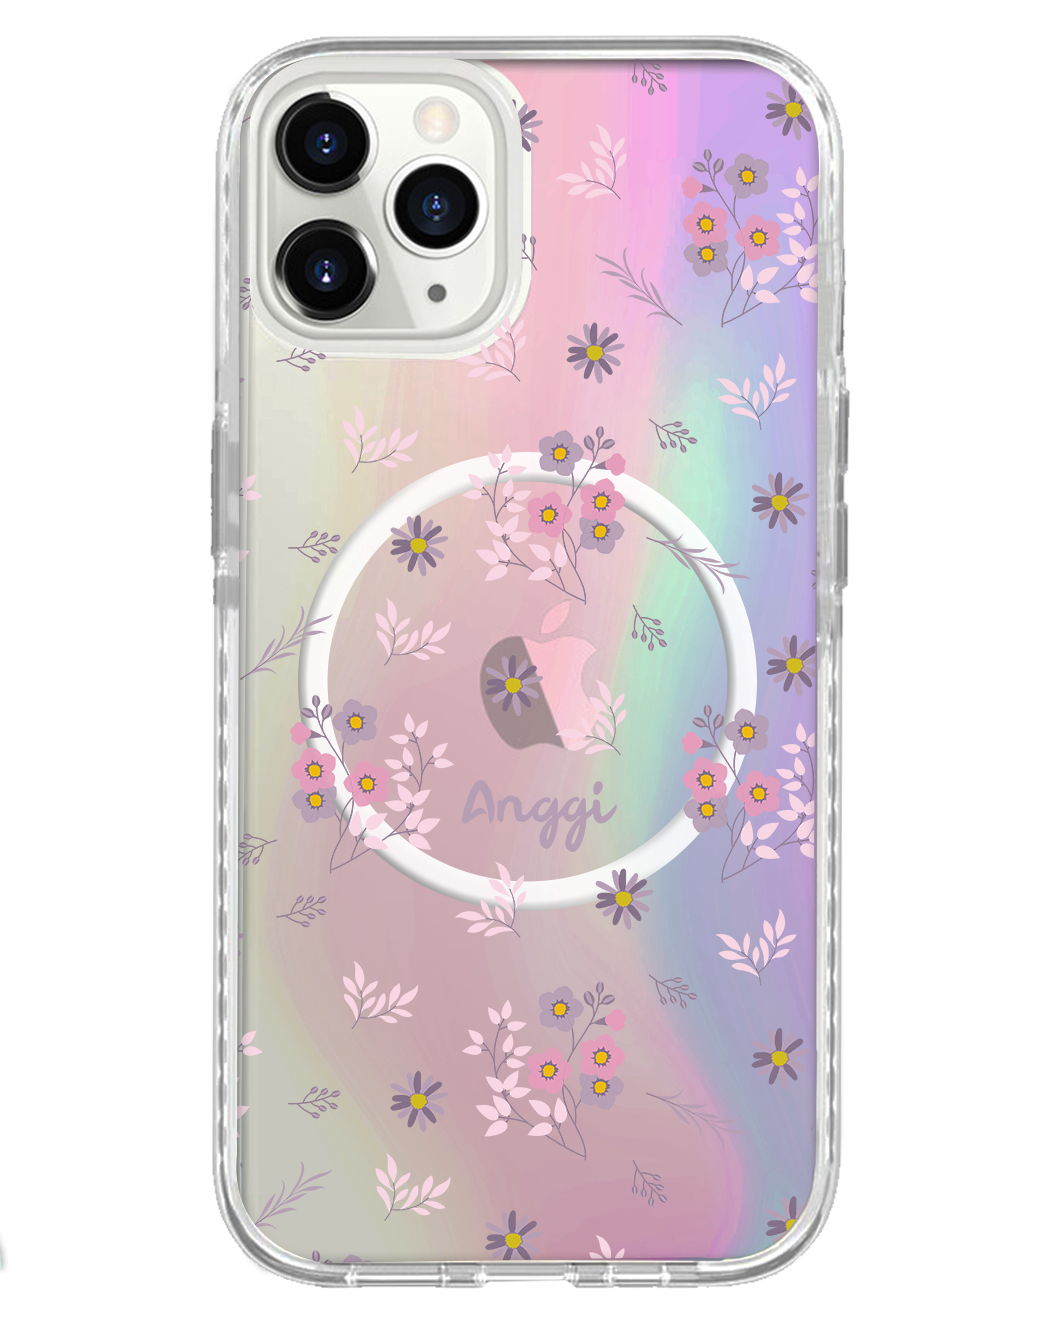 iPhone Rearguard Holo - Cherry Blossom